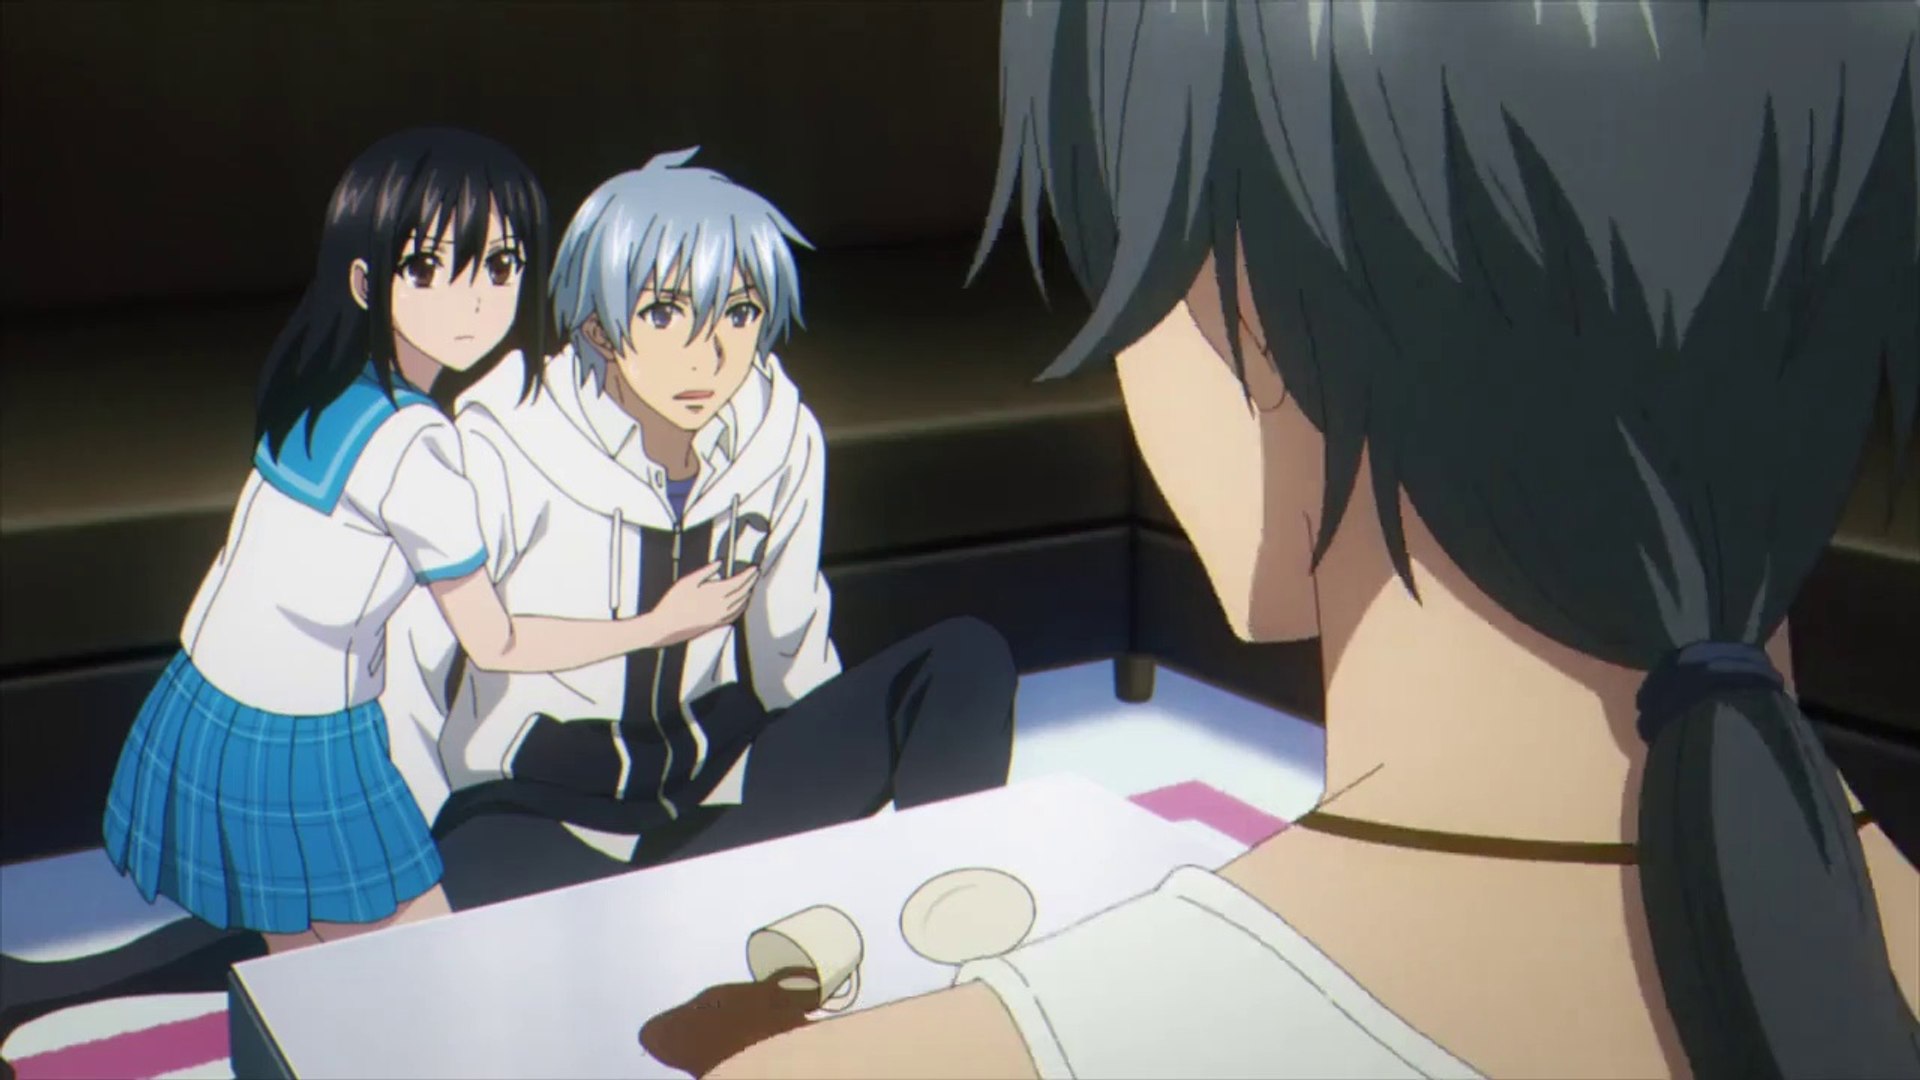 Strike the Blood  Episode 5 (English Dubbed HD) 